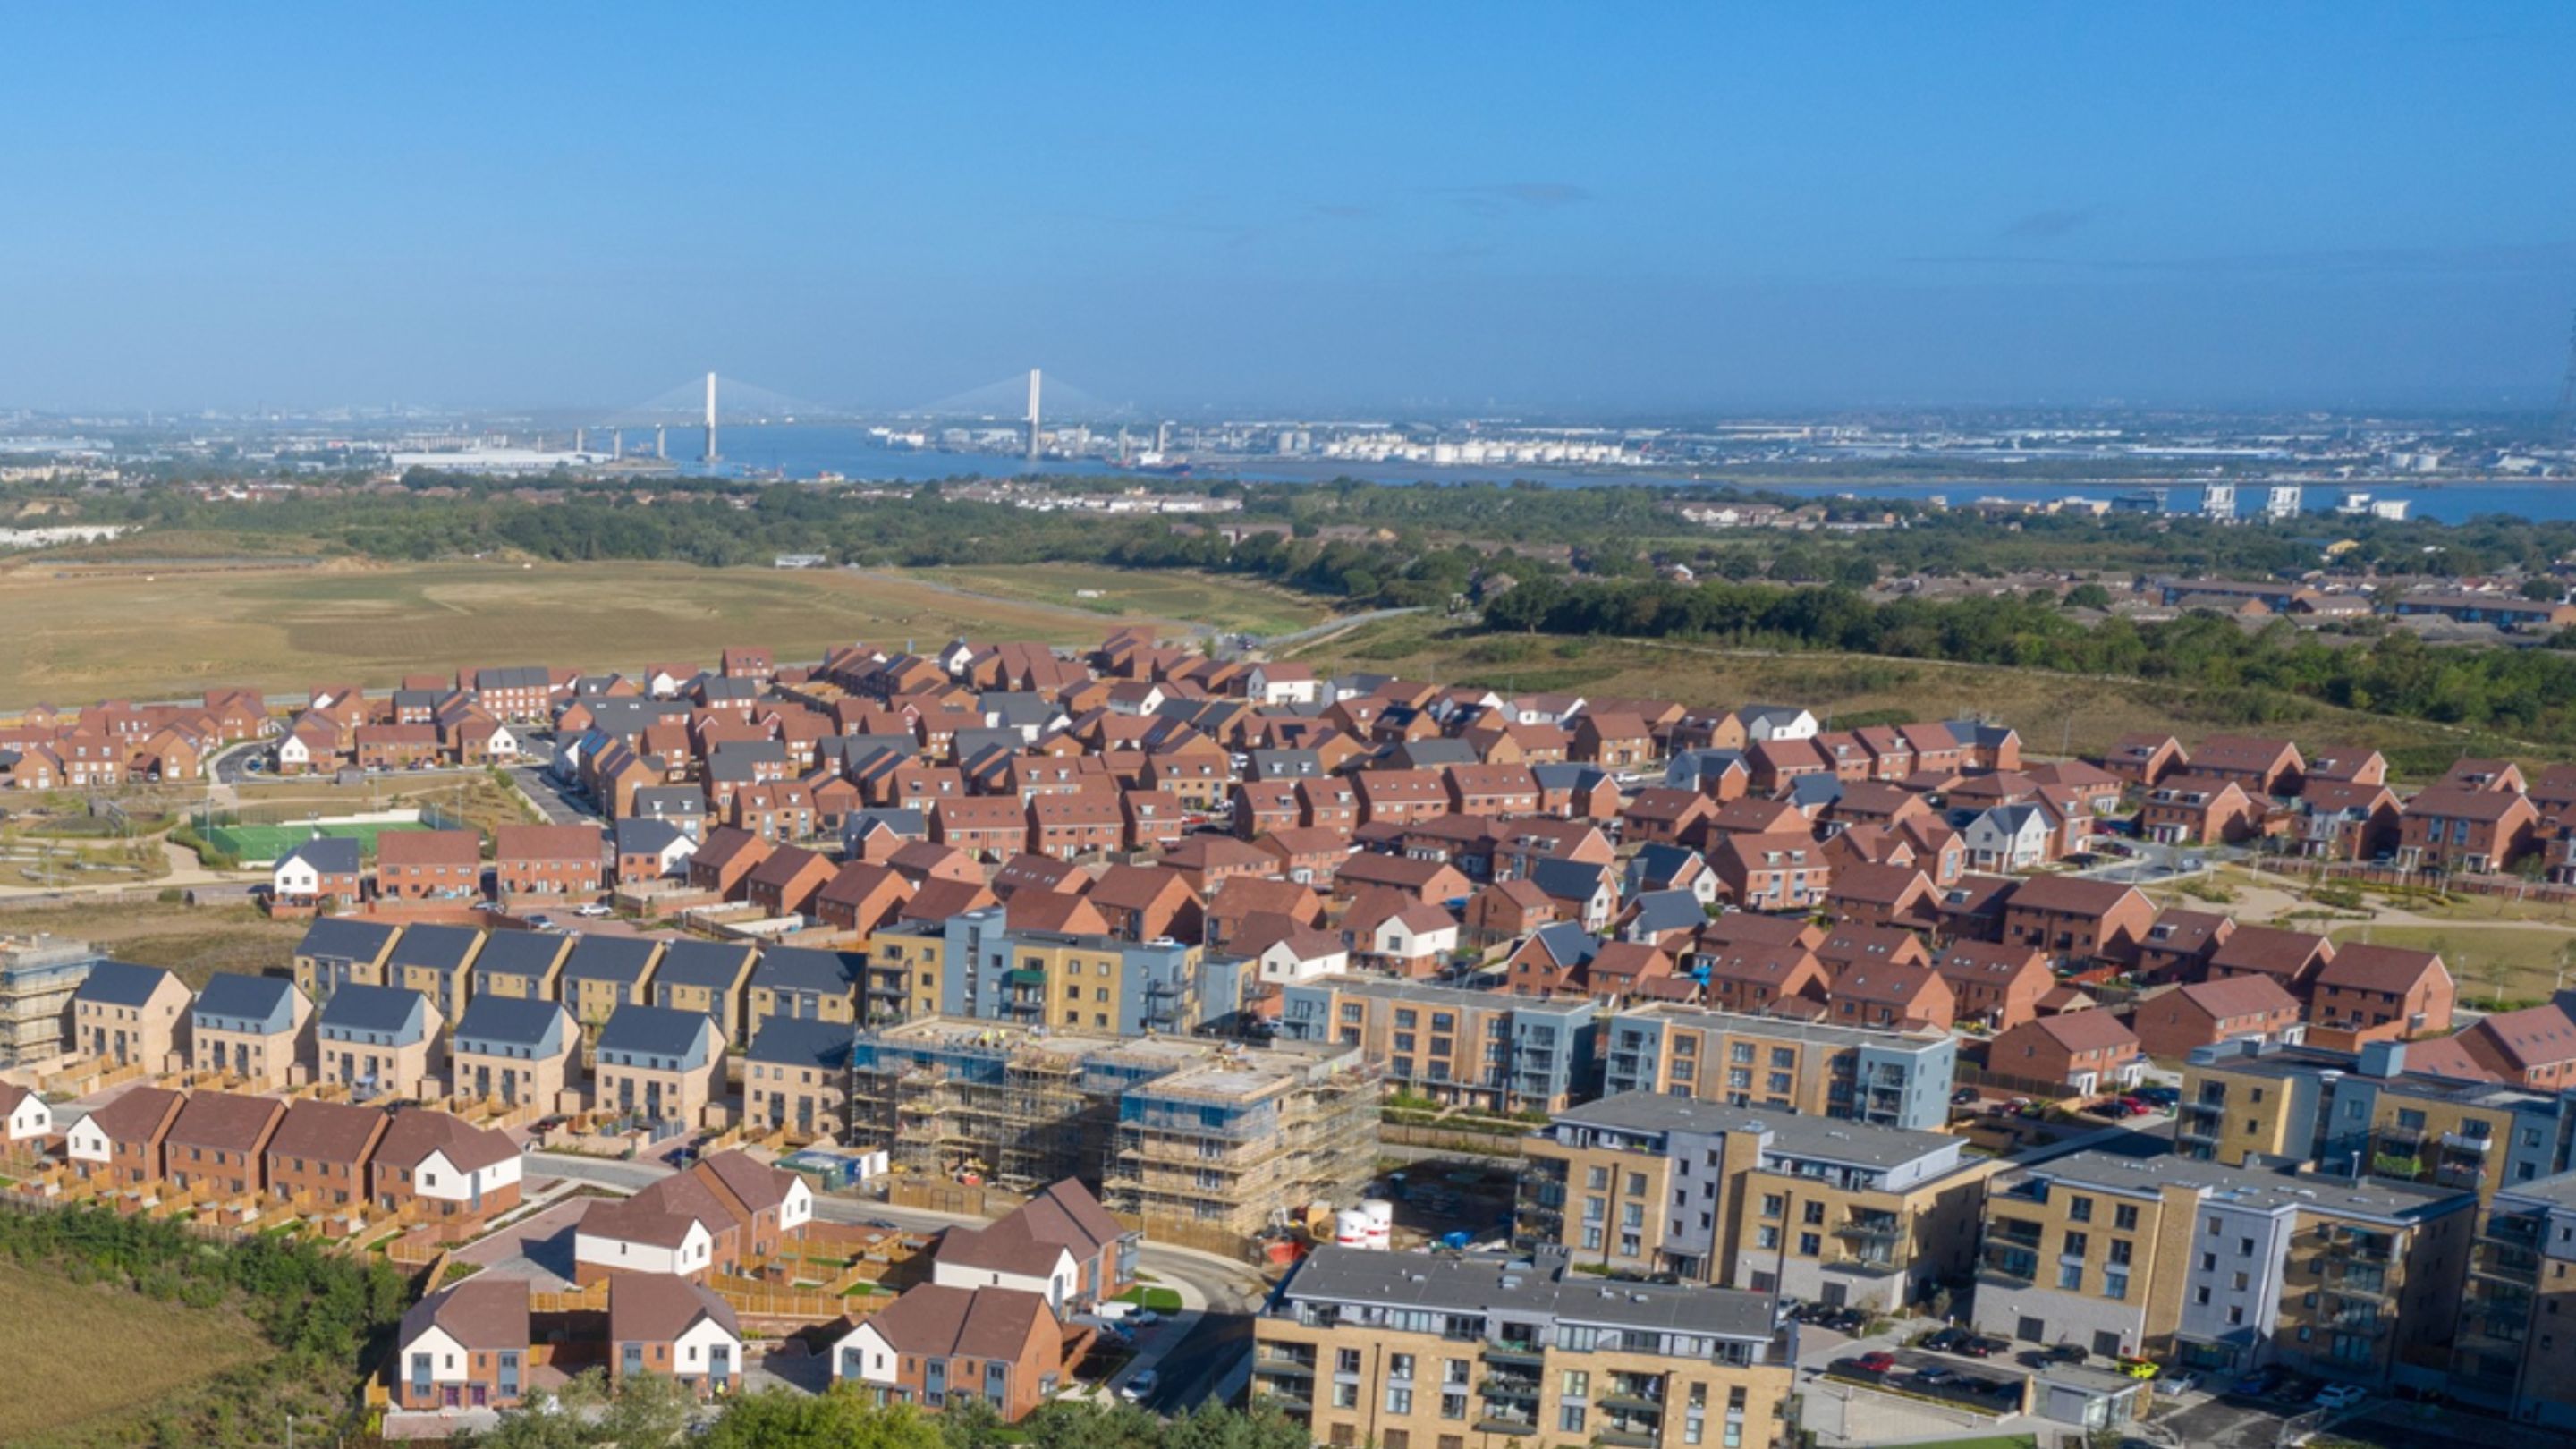 View of Castle Hill and Ebbsfleet